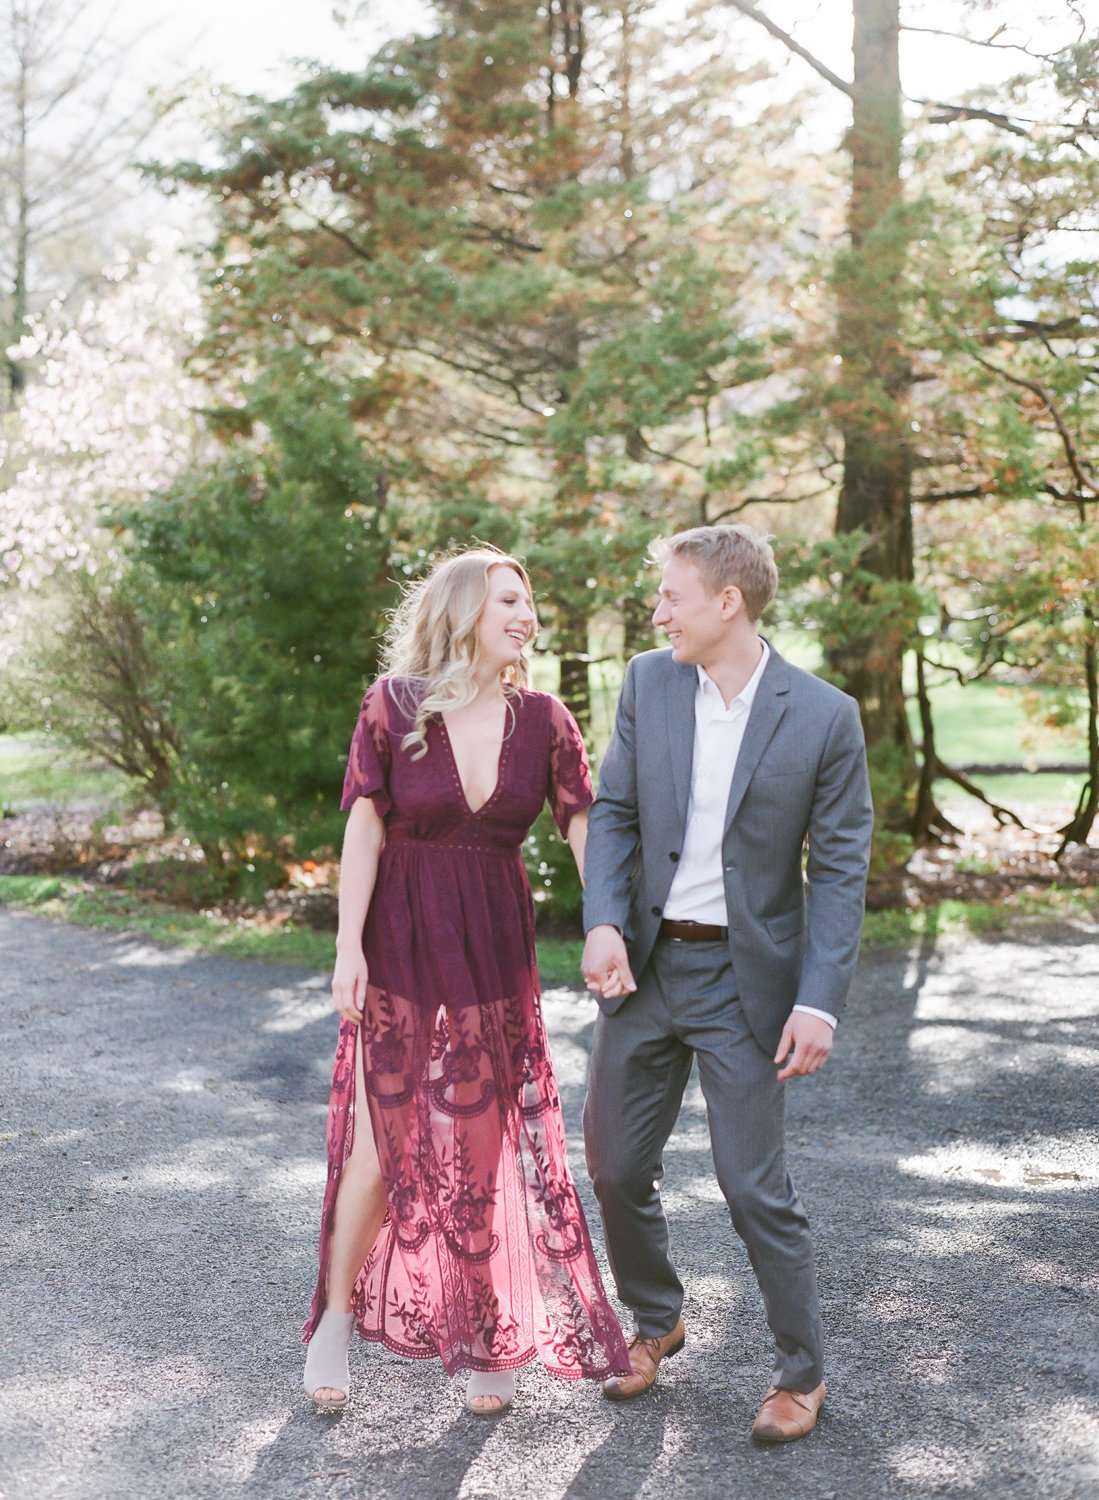 Jacqueline Anne Photography - Amanda and Brent-92